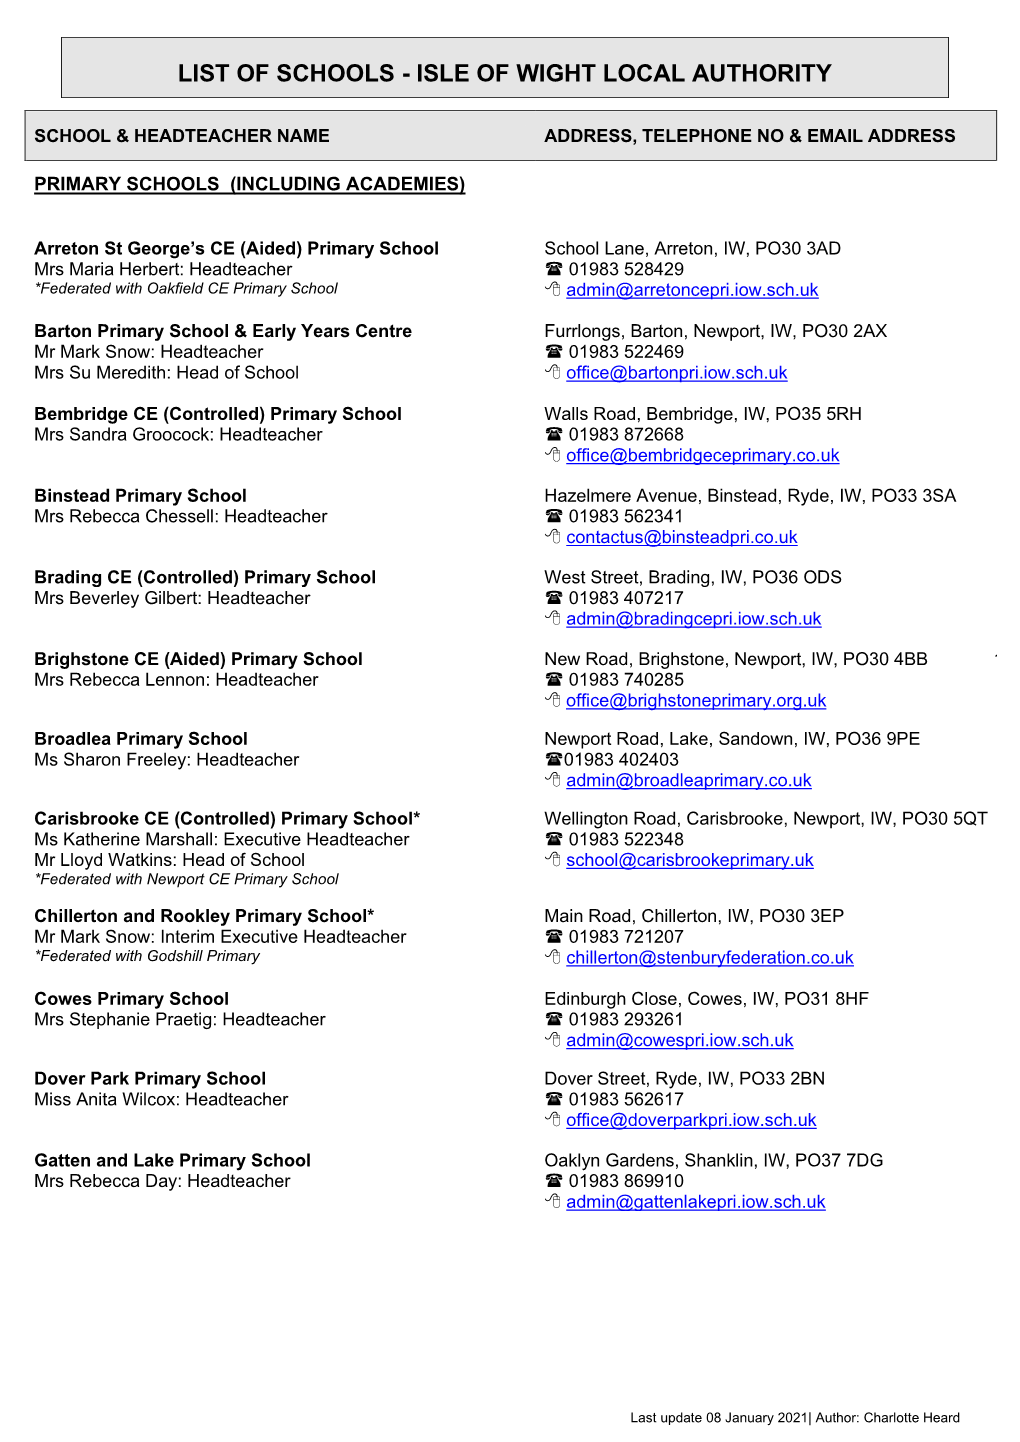 List of Schools - Isle of Wight Local Authority